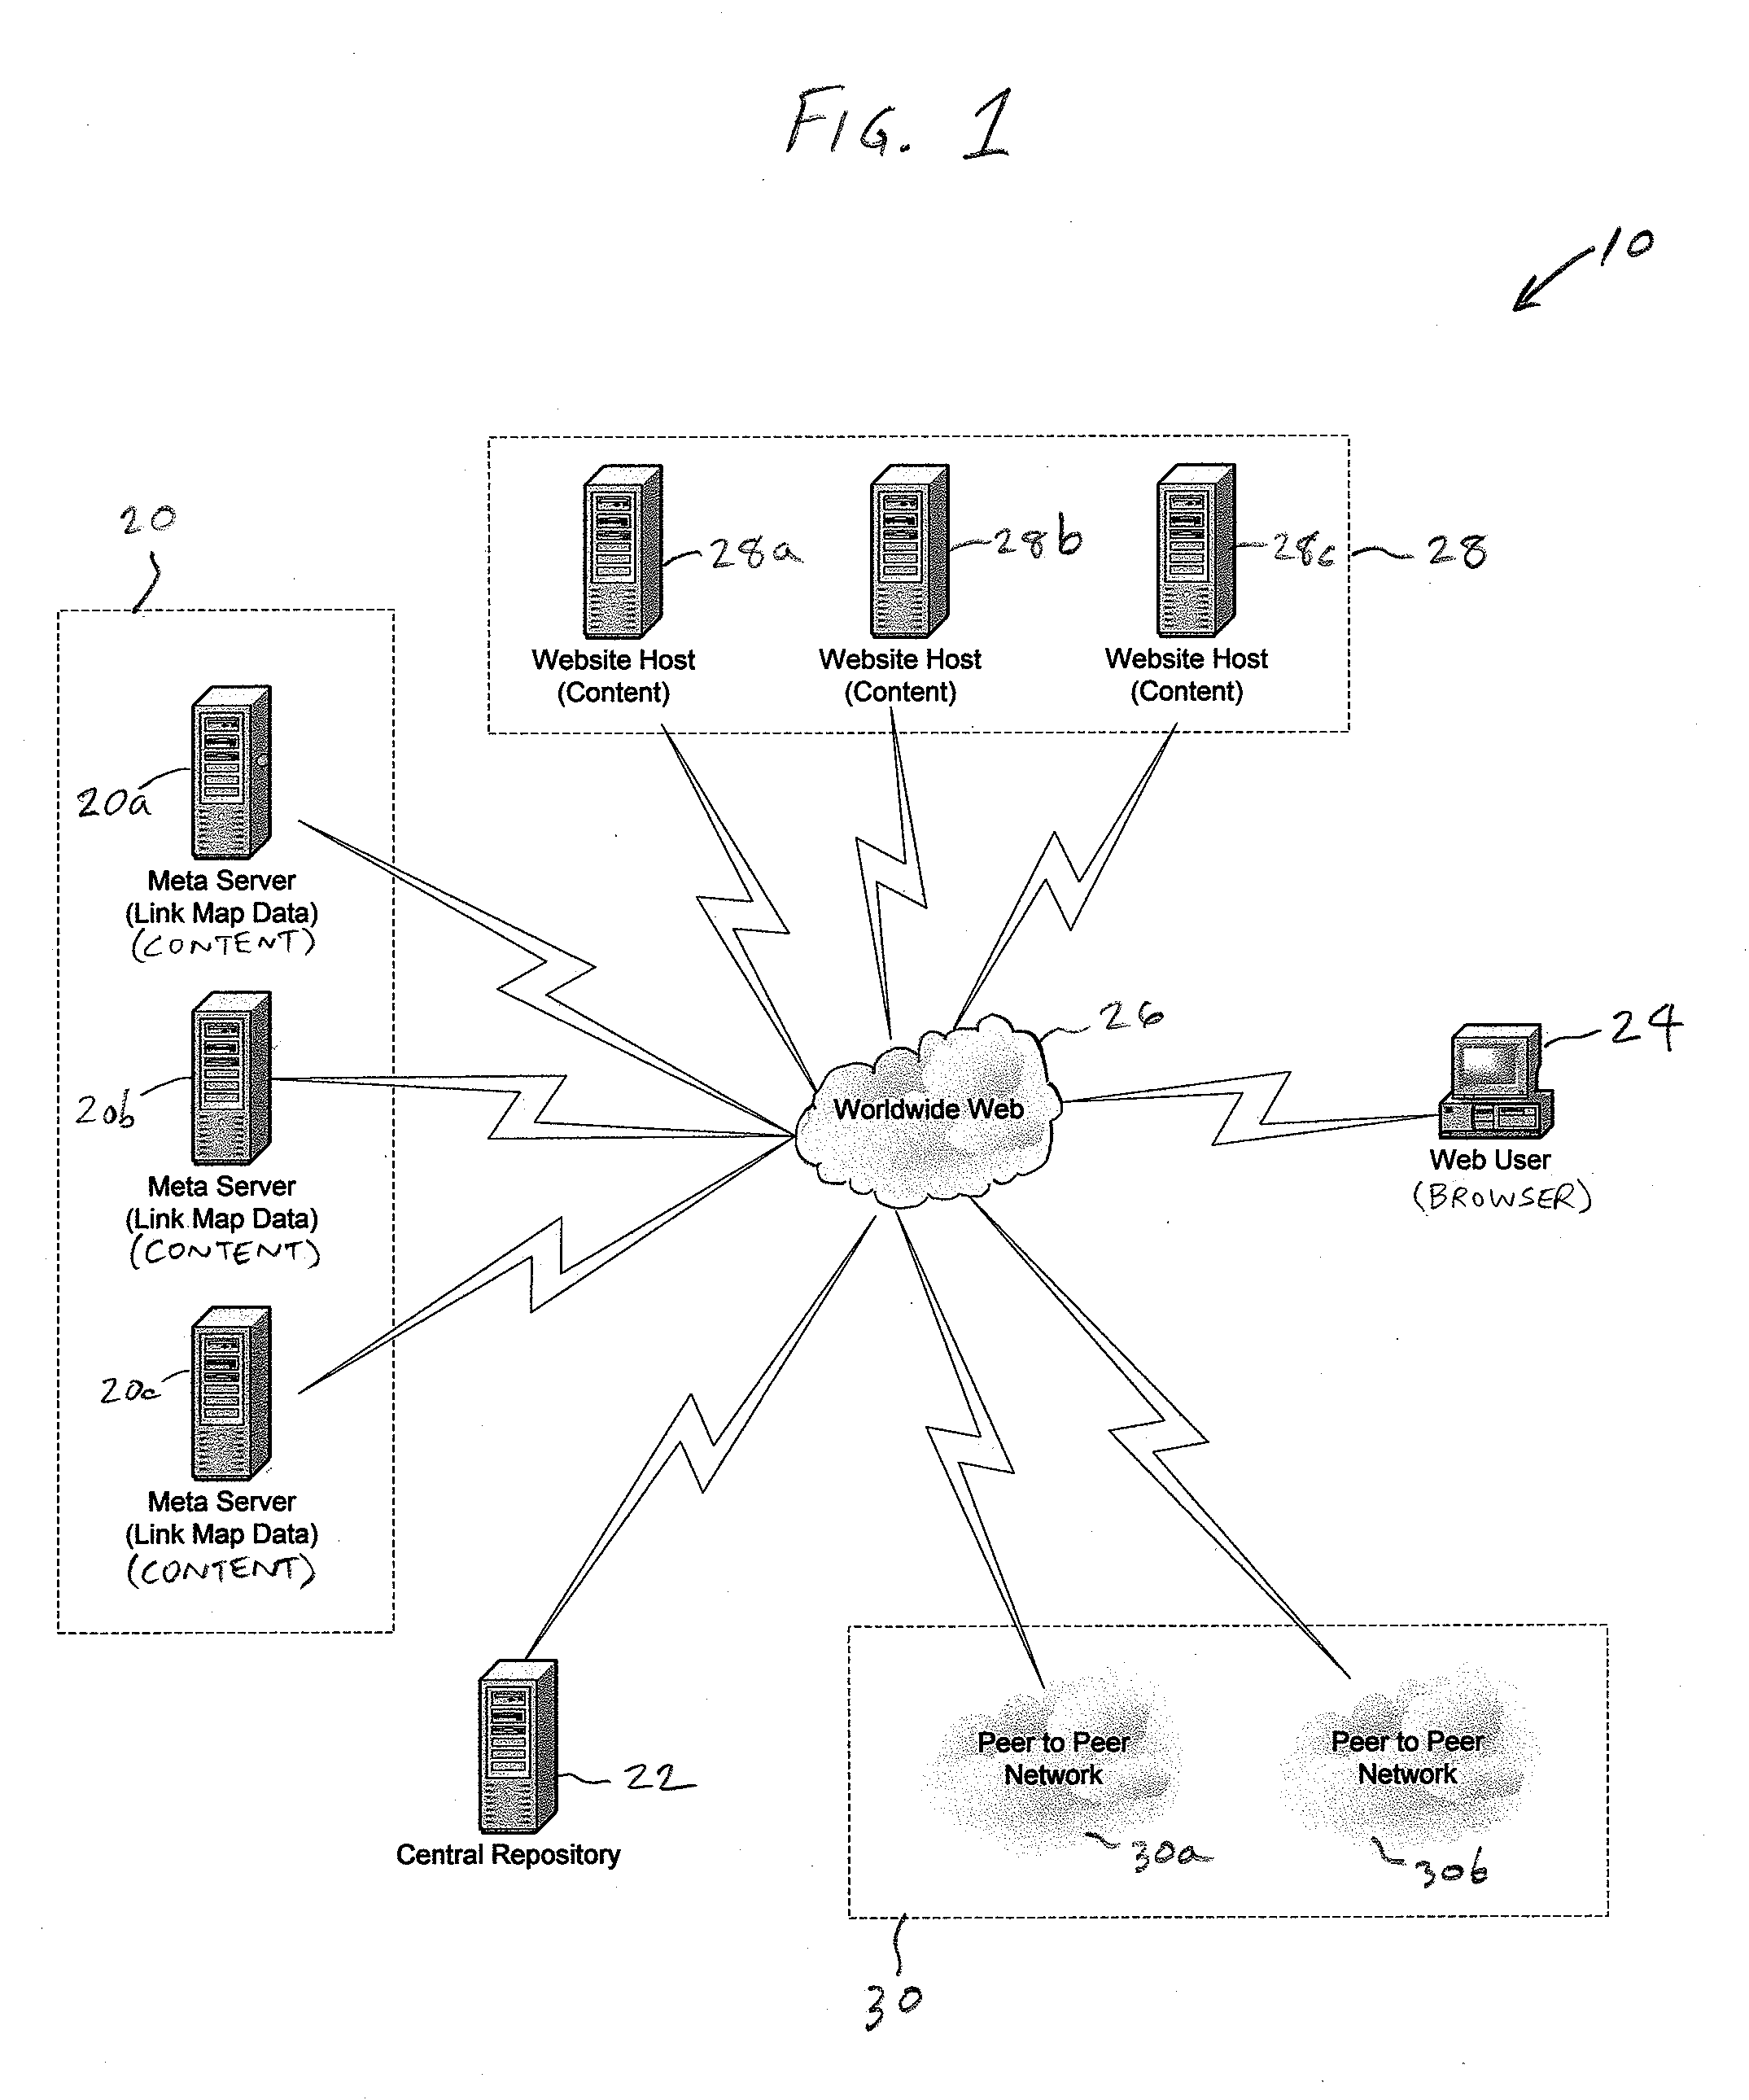 System and Method for Searching for Internet-Accessible Content